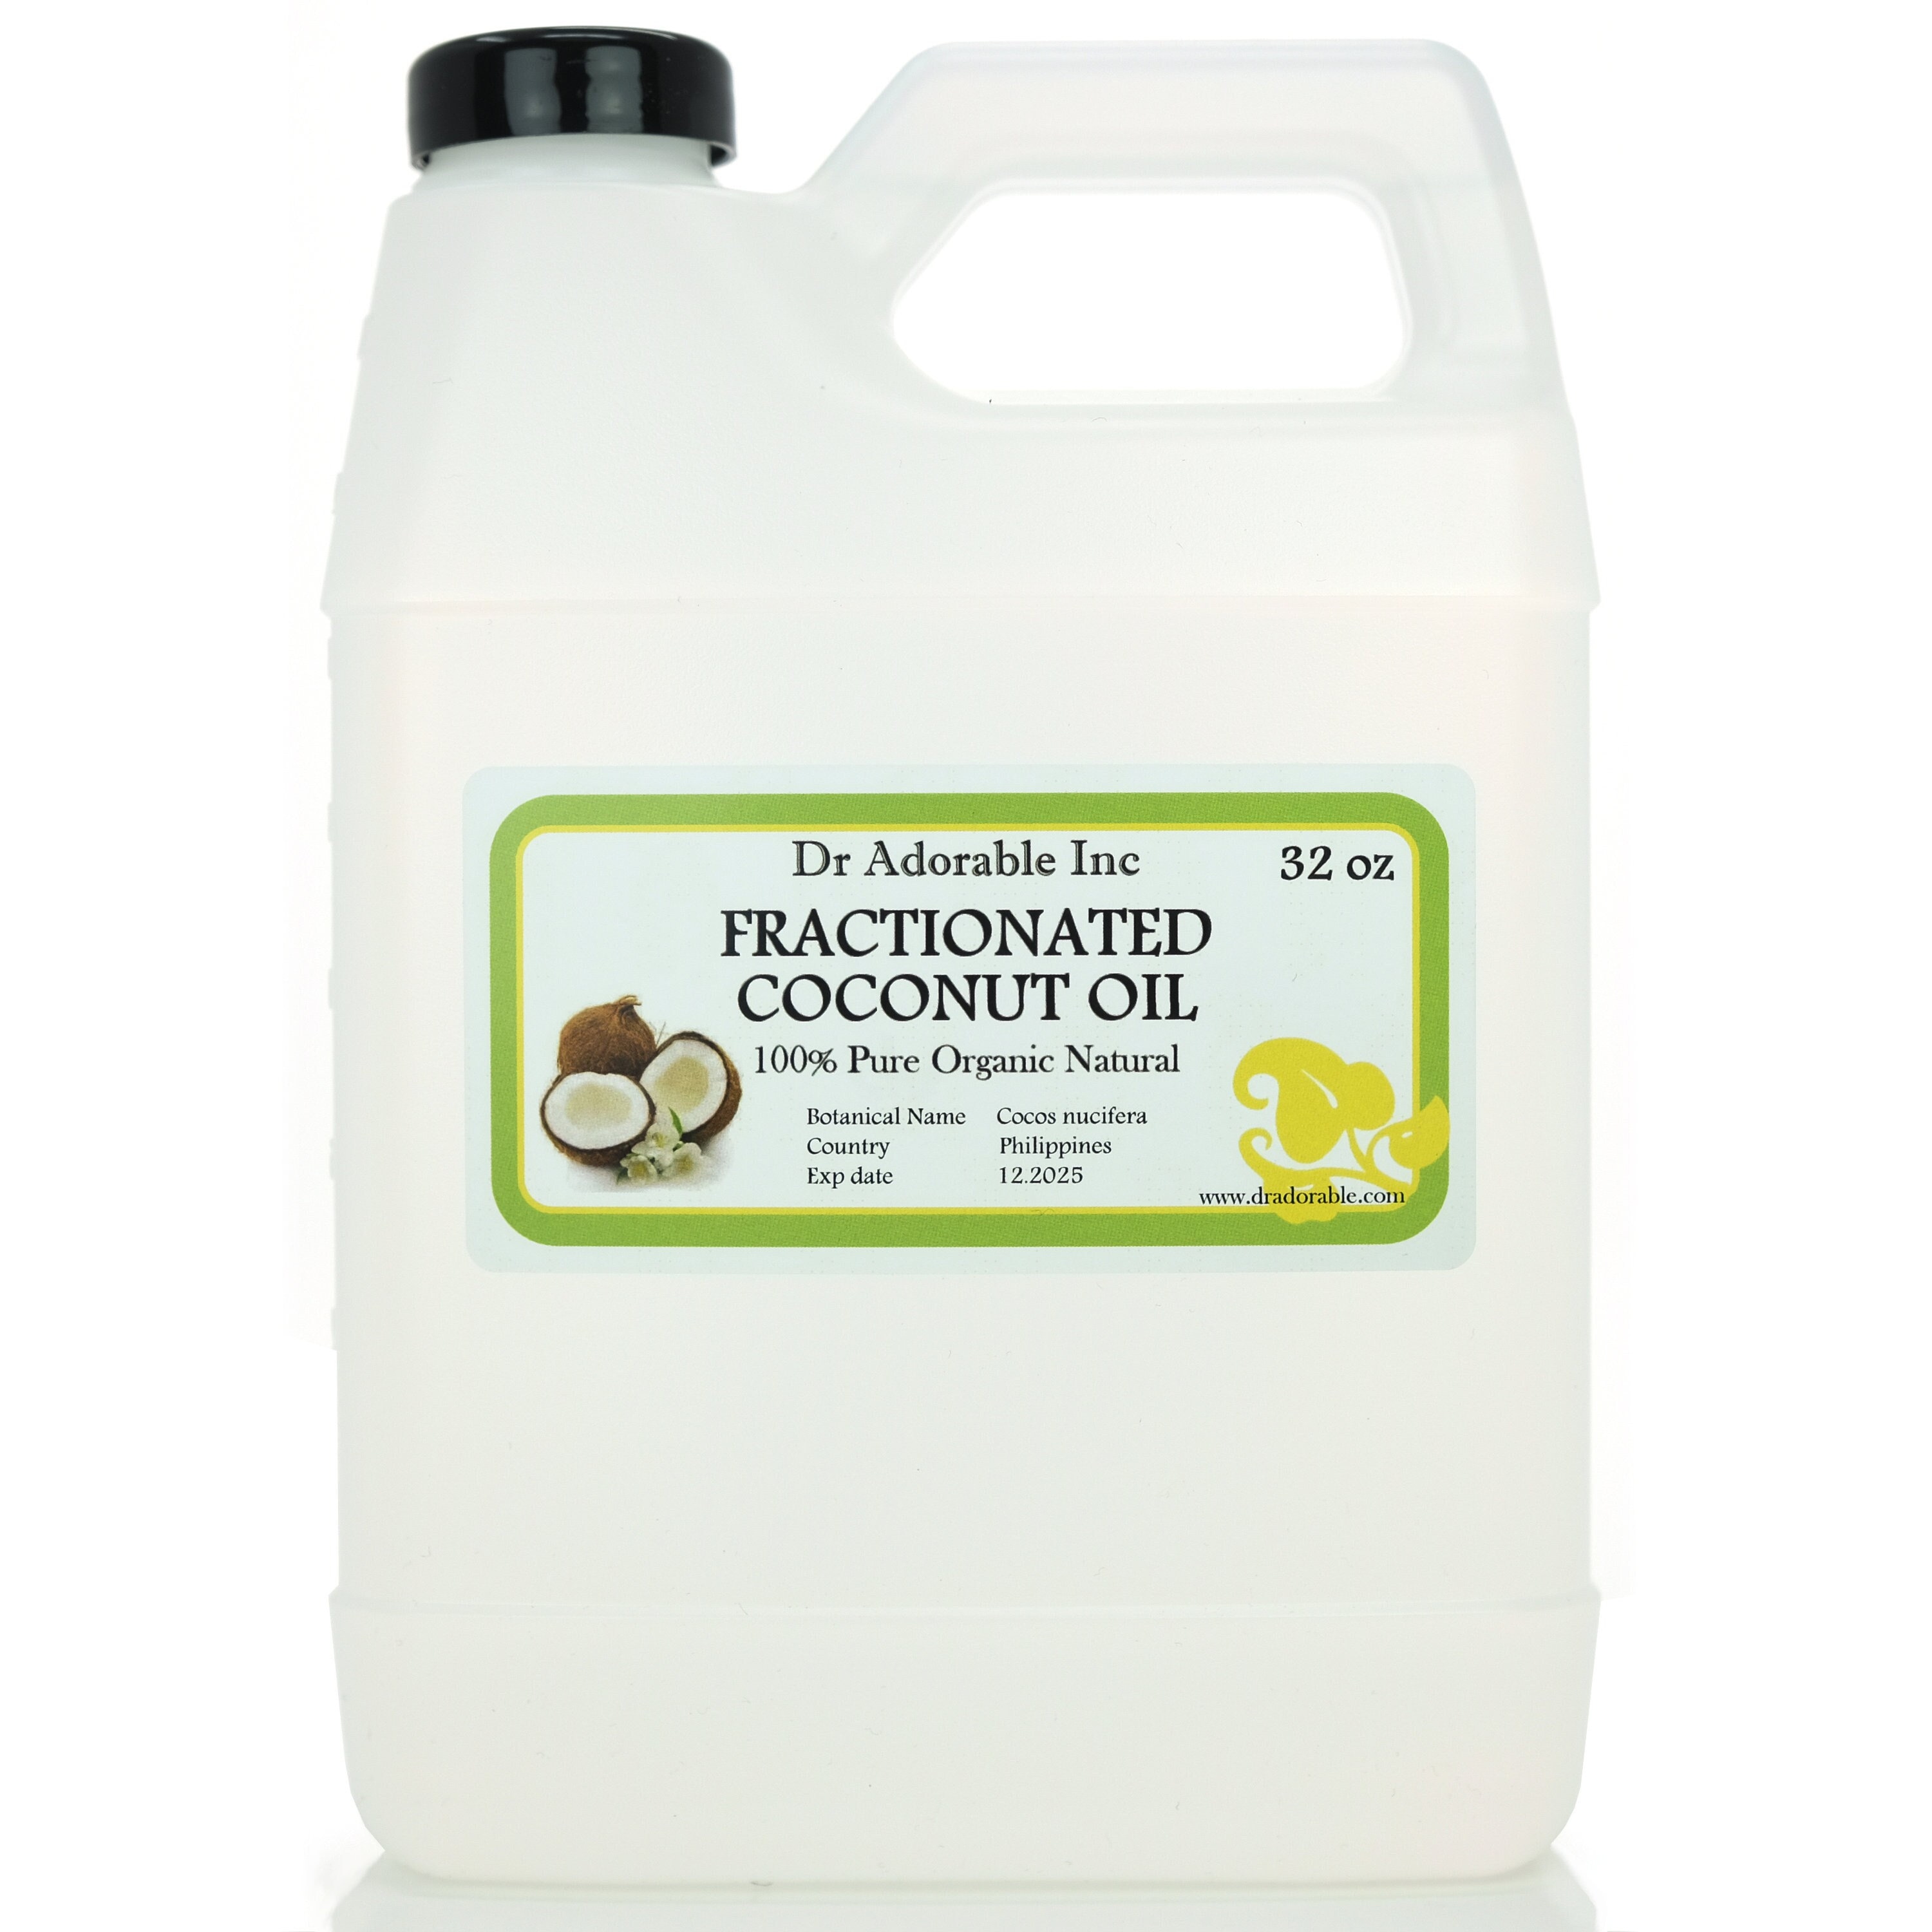 Natures Oil 1 Fractionated Coconut Oil (MCT Oil) Oil Gallon for  Aromatherapy, Massage, Diluting Essential Oils, Hair & Skin Care  Moisturizer 